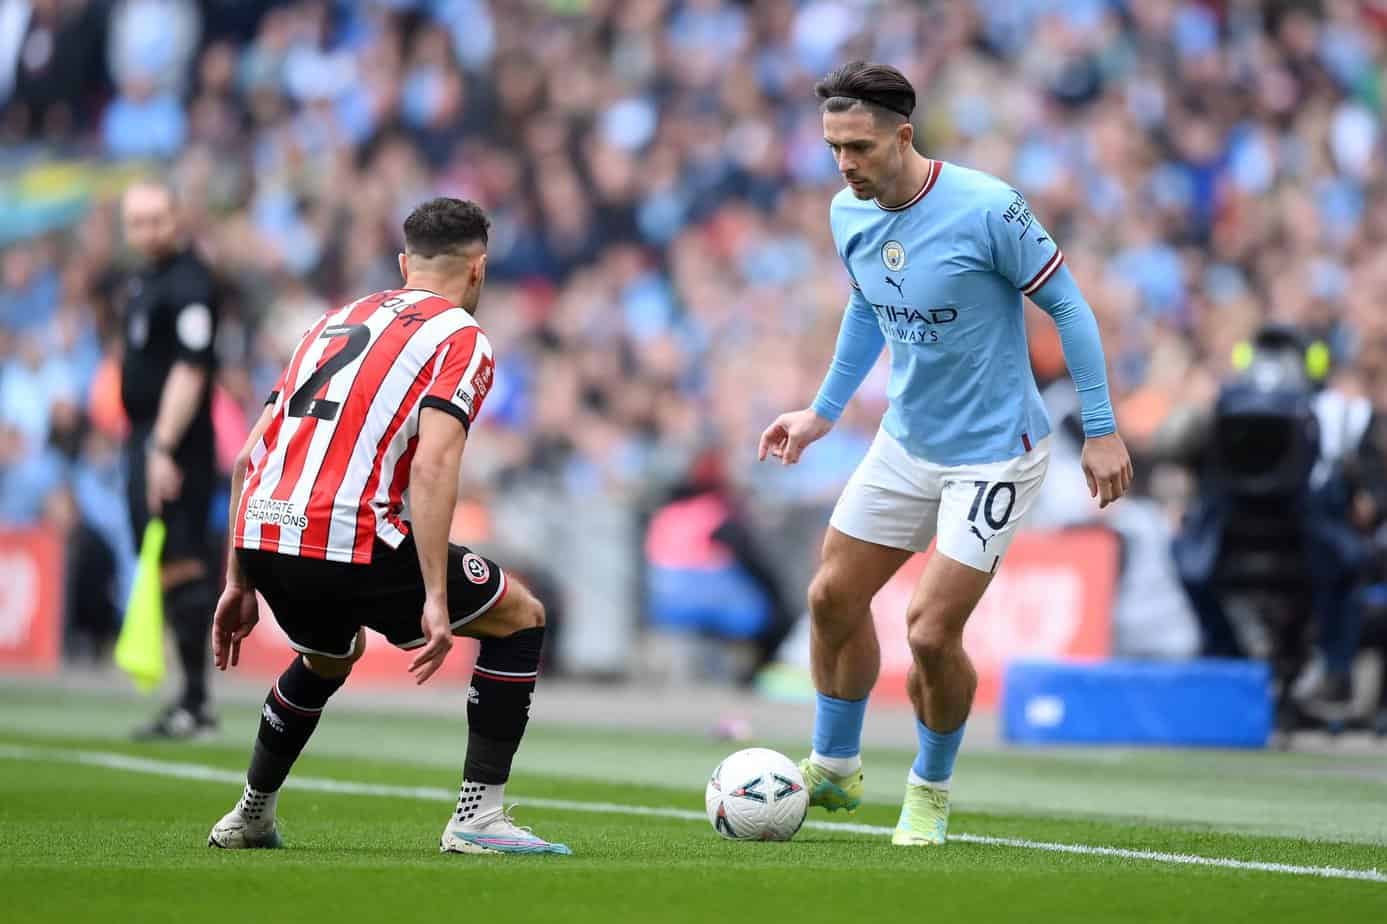 Sheffield United vs. Manchester City Betting Odds and Preview